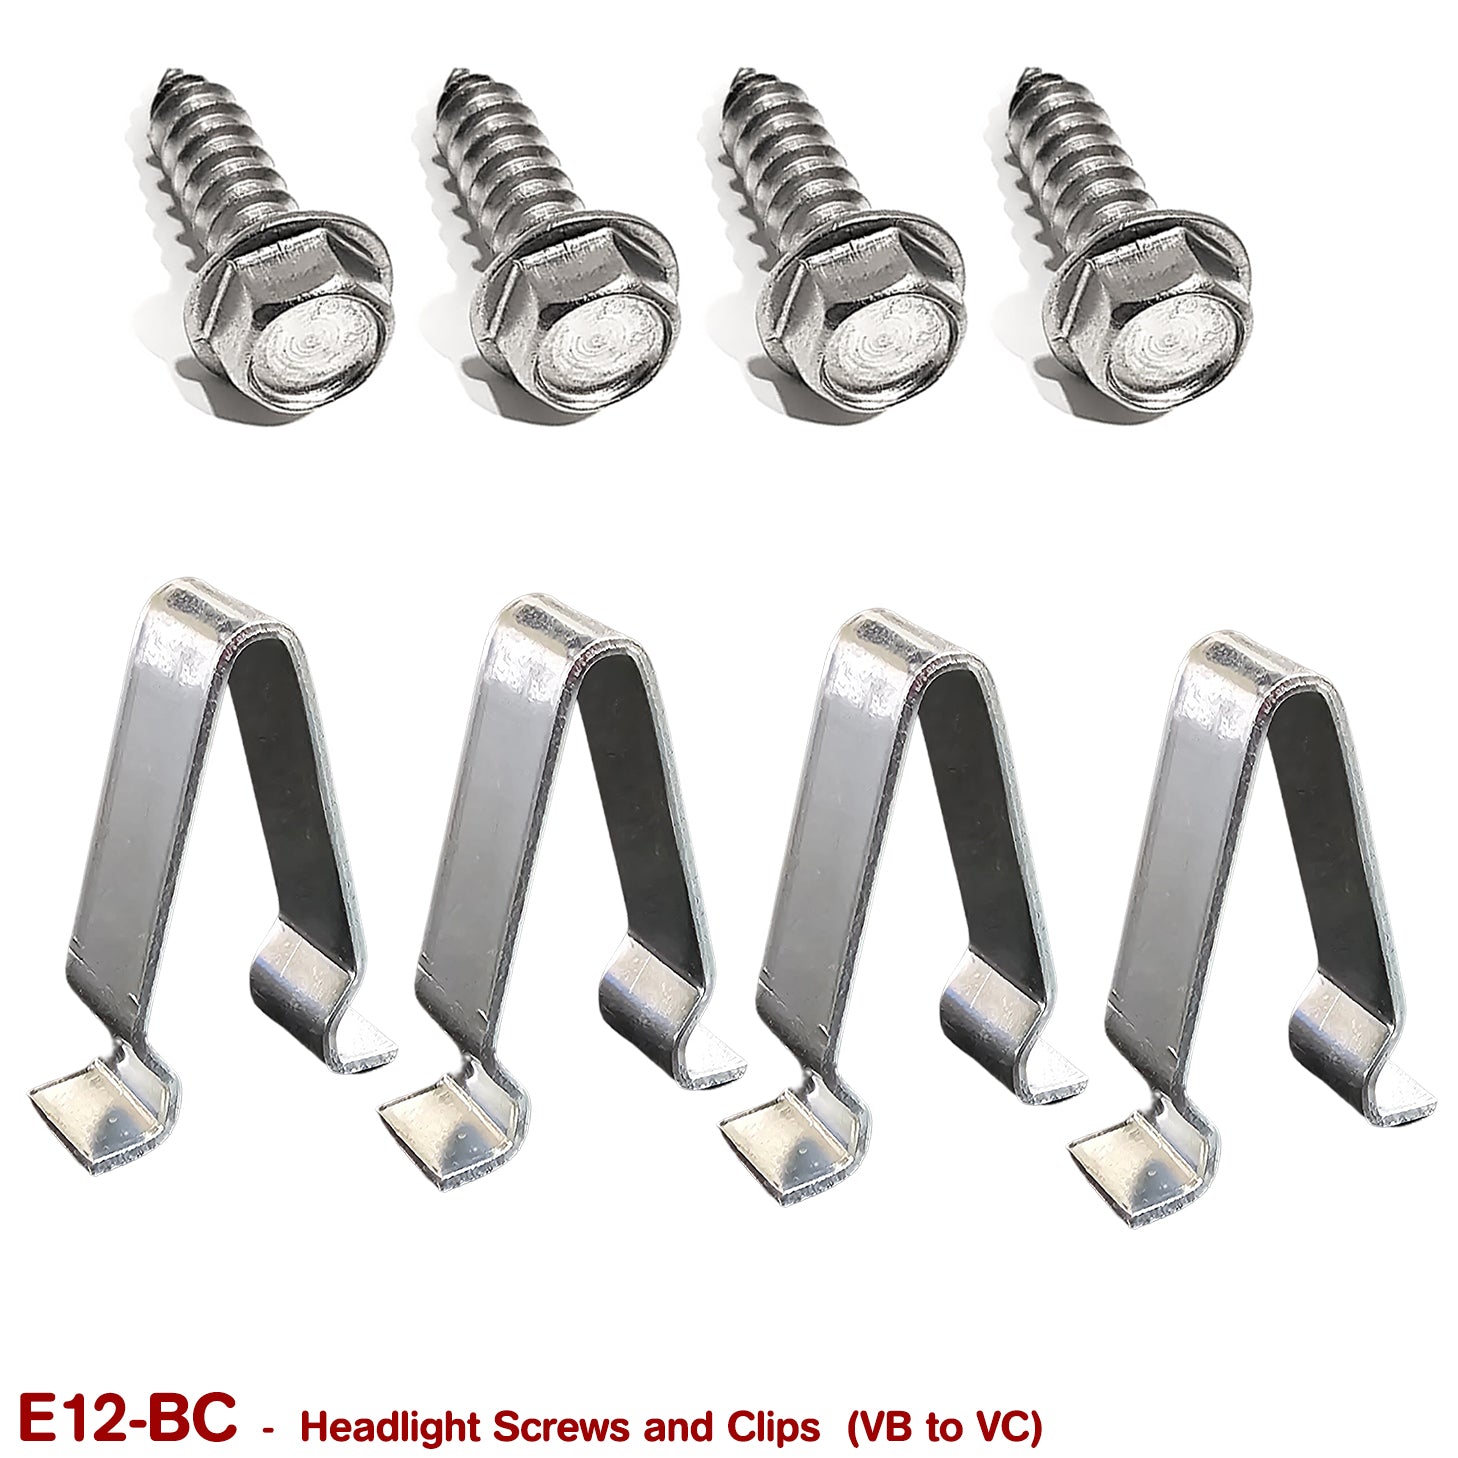 HEADLIGHT SCREWS and CLIPS for VB VC